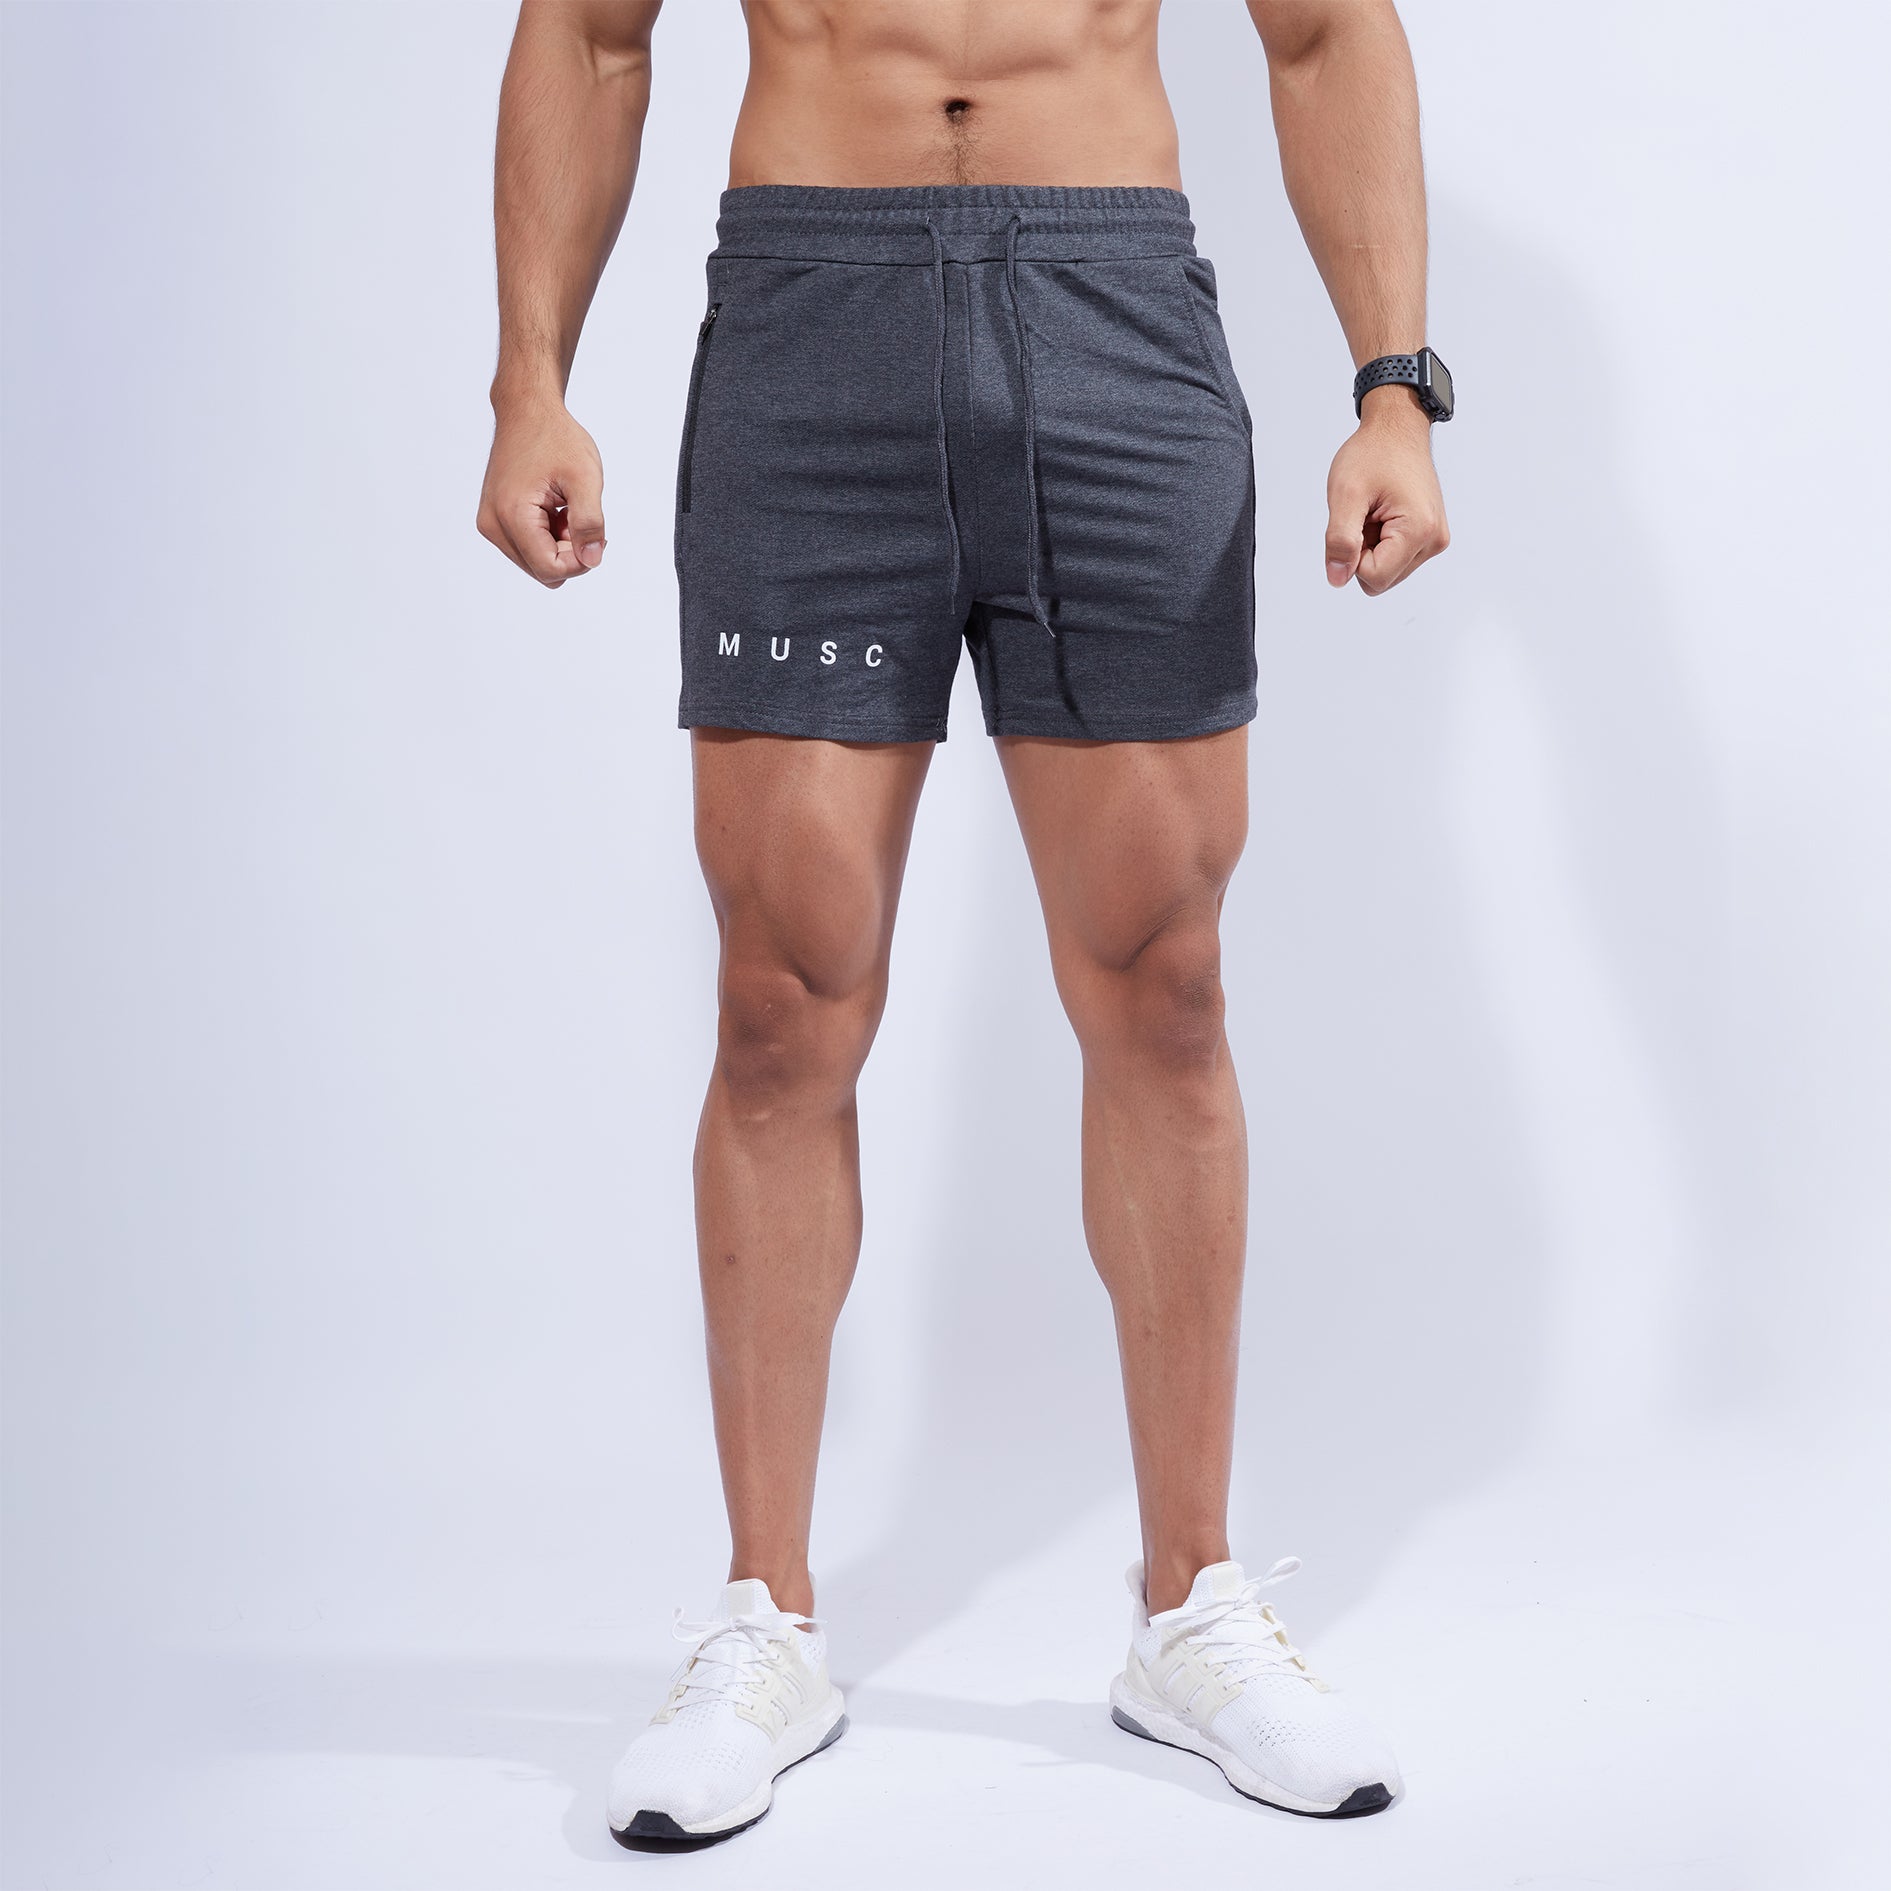 Musculo slim fit gym shorts // Gray – MUSCULO